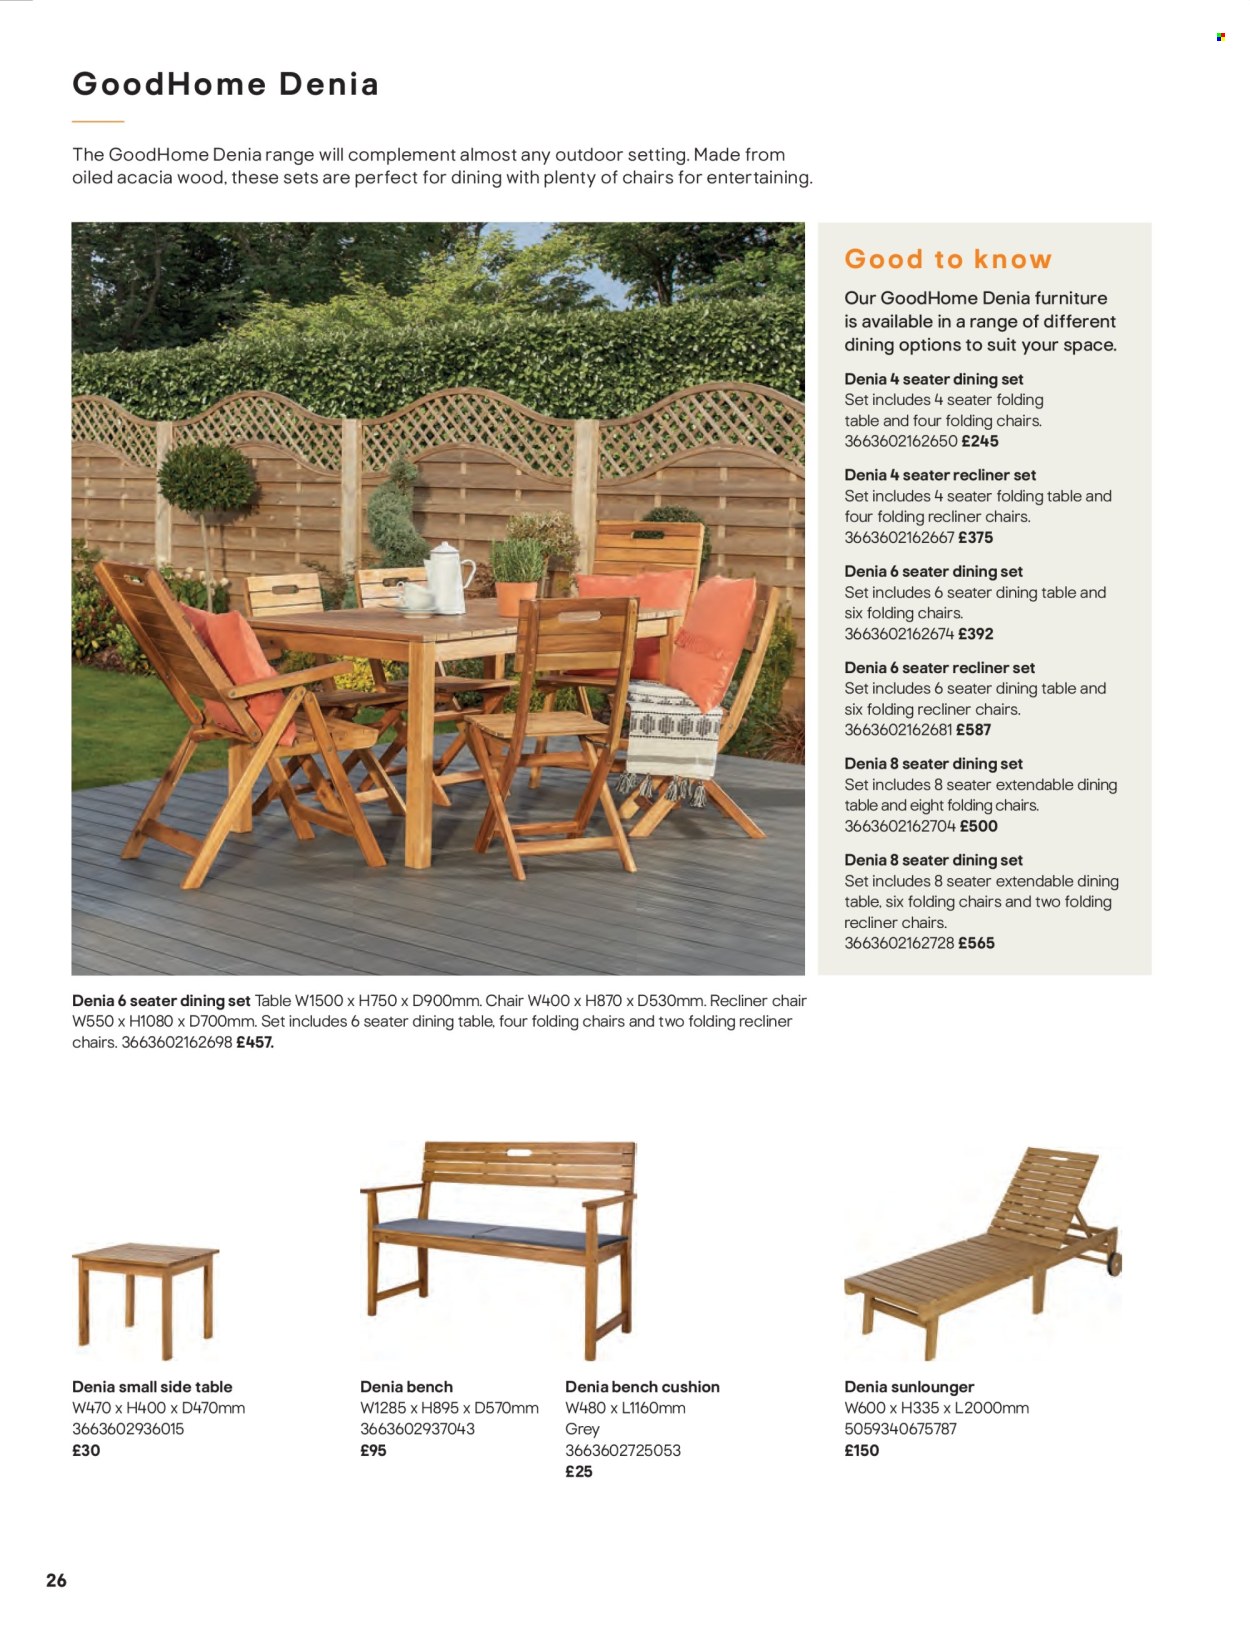 thumbnail - B&Q offer  - Sales products - bench cushion, cushion, dining set, dining table, table, chair, recliner chair, sidetable, folding table, lounger. Page 26.